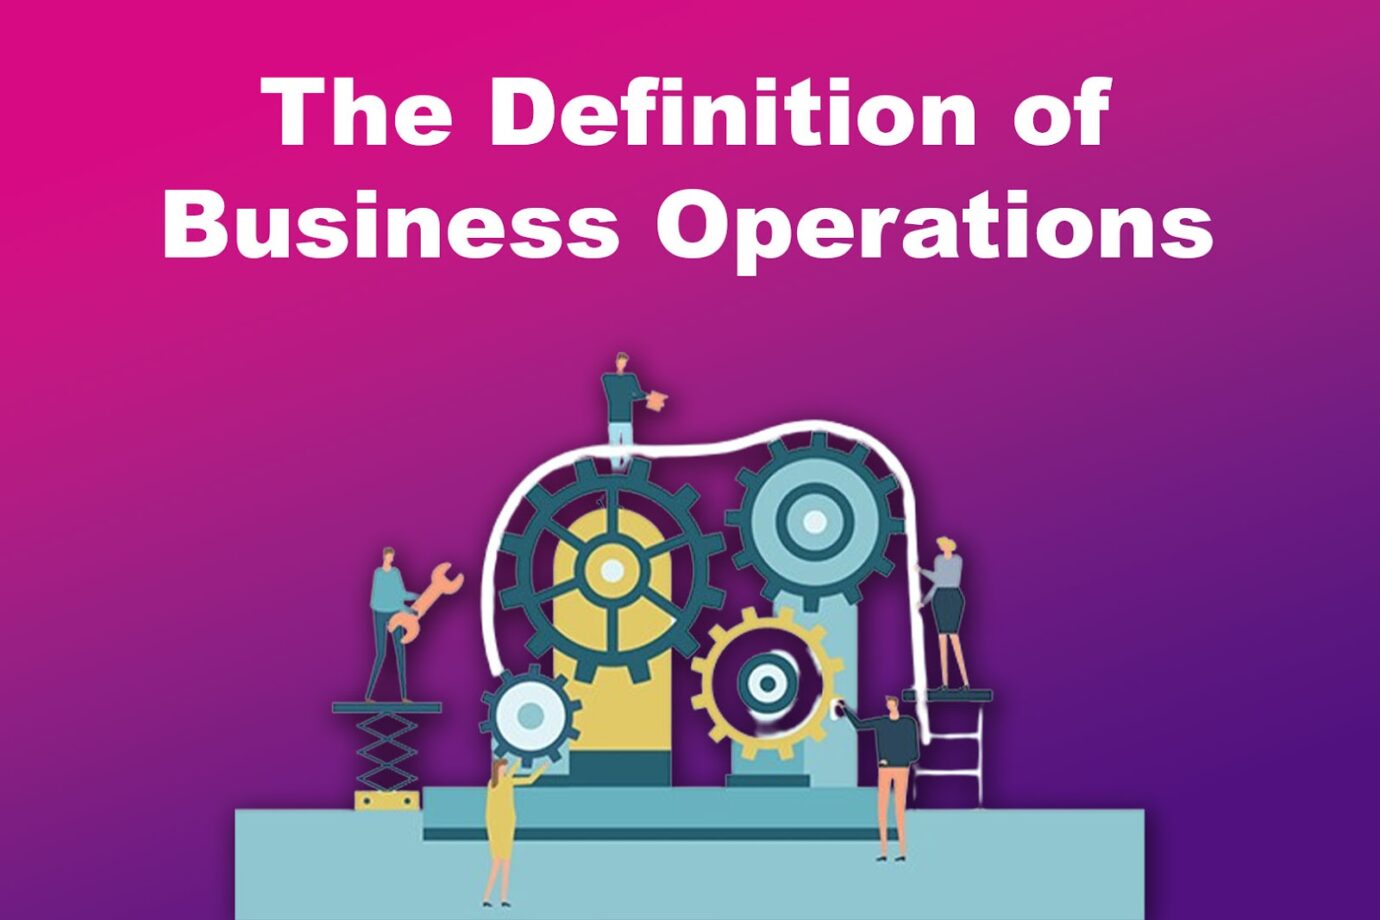 The Definition of Business Operations